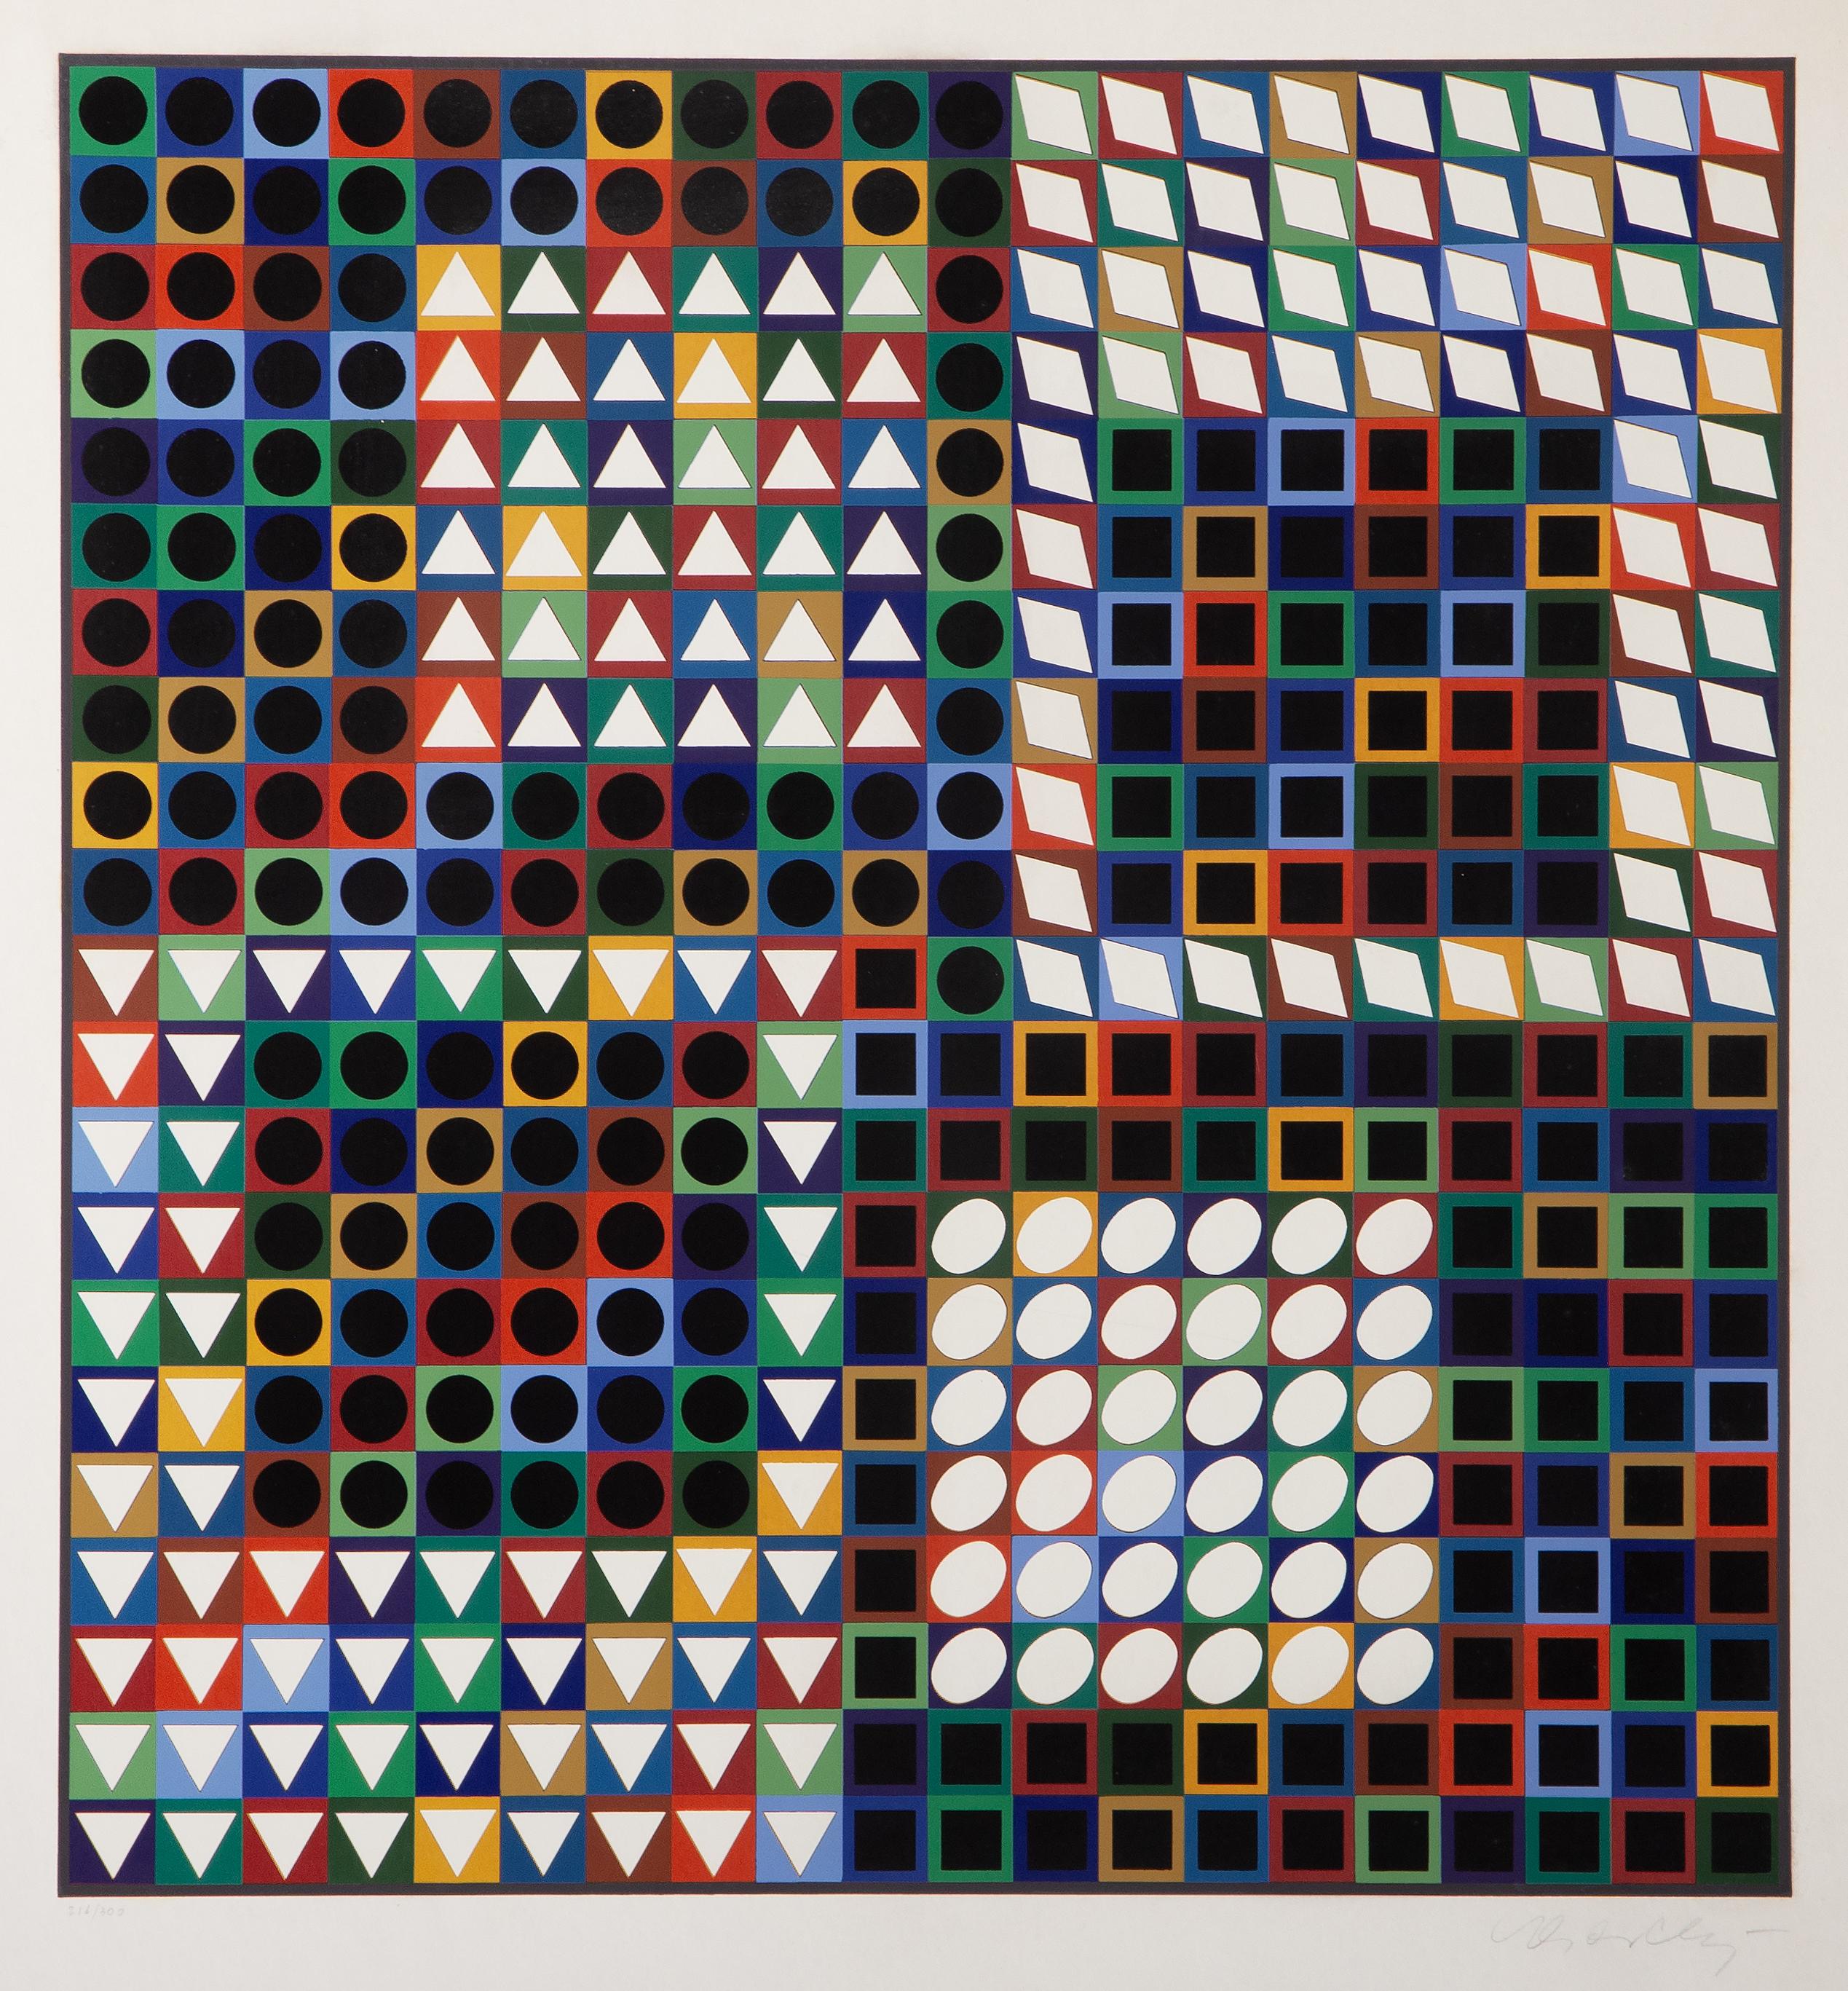 What are the names of some artworks by Victor Vasarely?